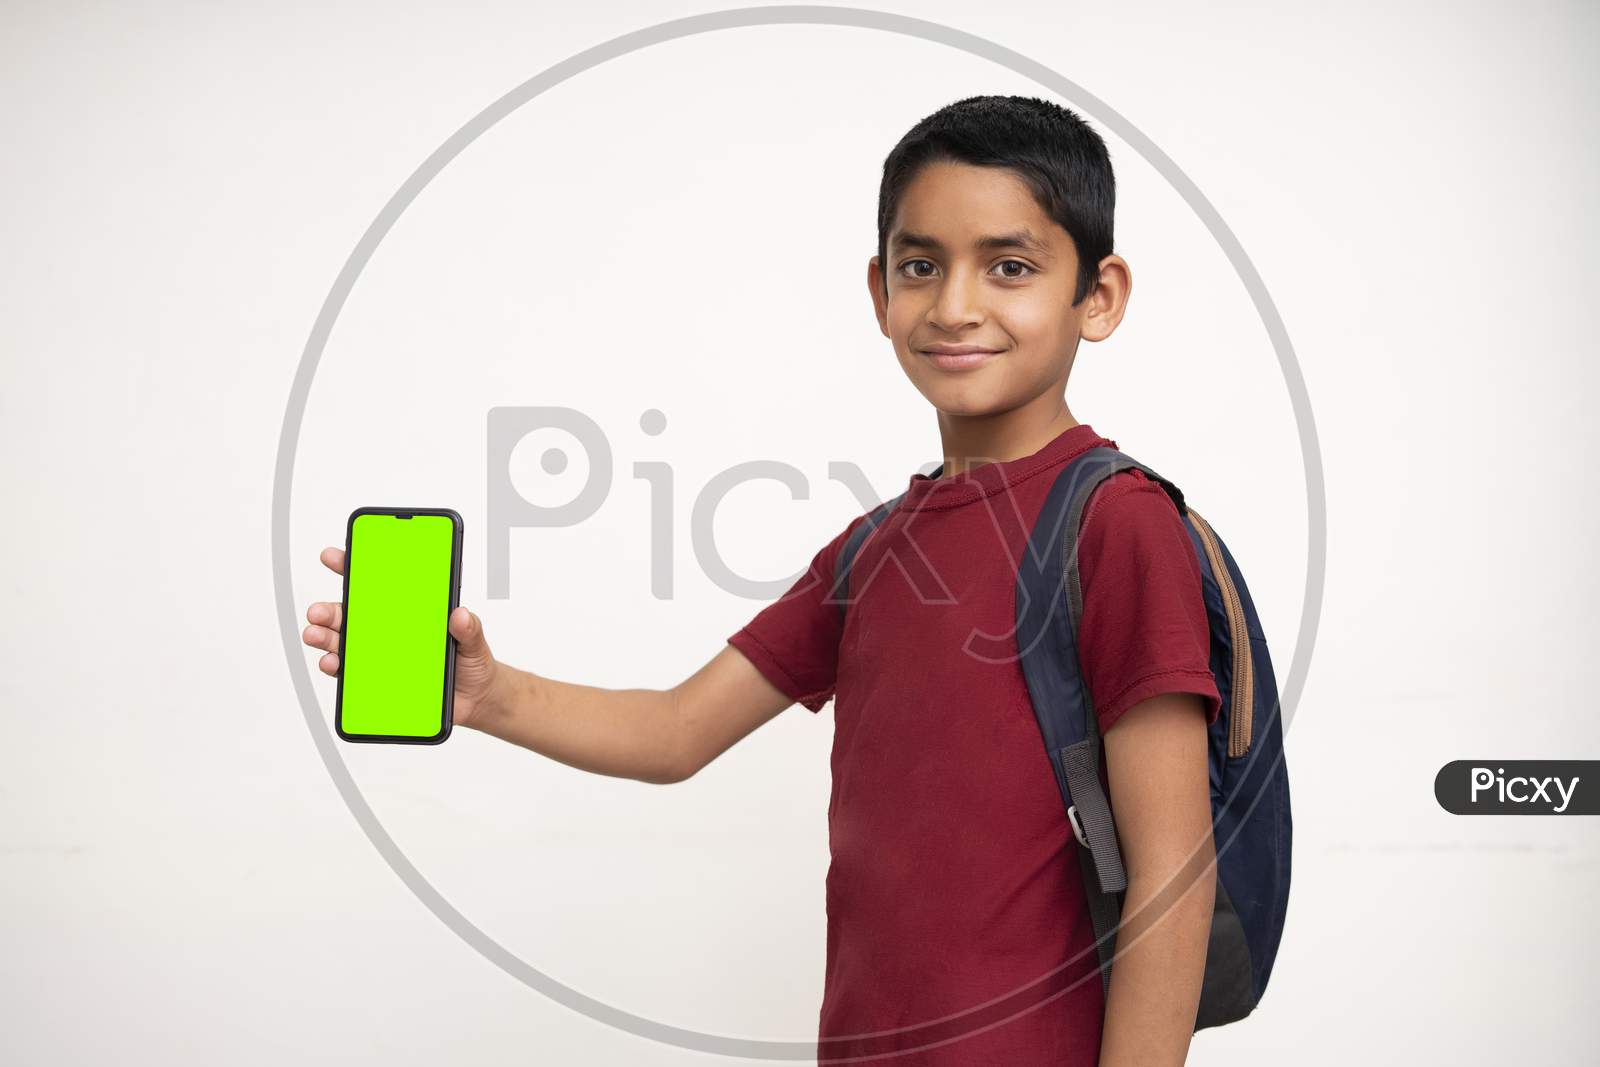 Young Indian Kid Holding A Phone In His Hand With A Green Screen, School Bag In His Back And Wearing Red T-Shirt Standing On White Isolated Background.